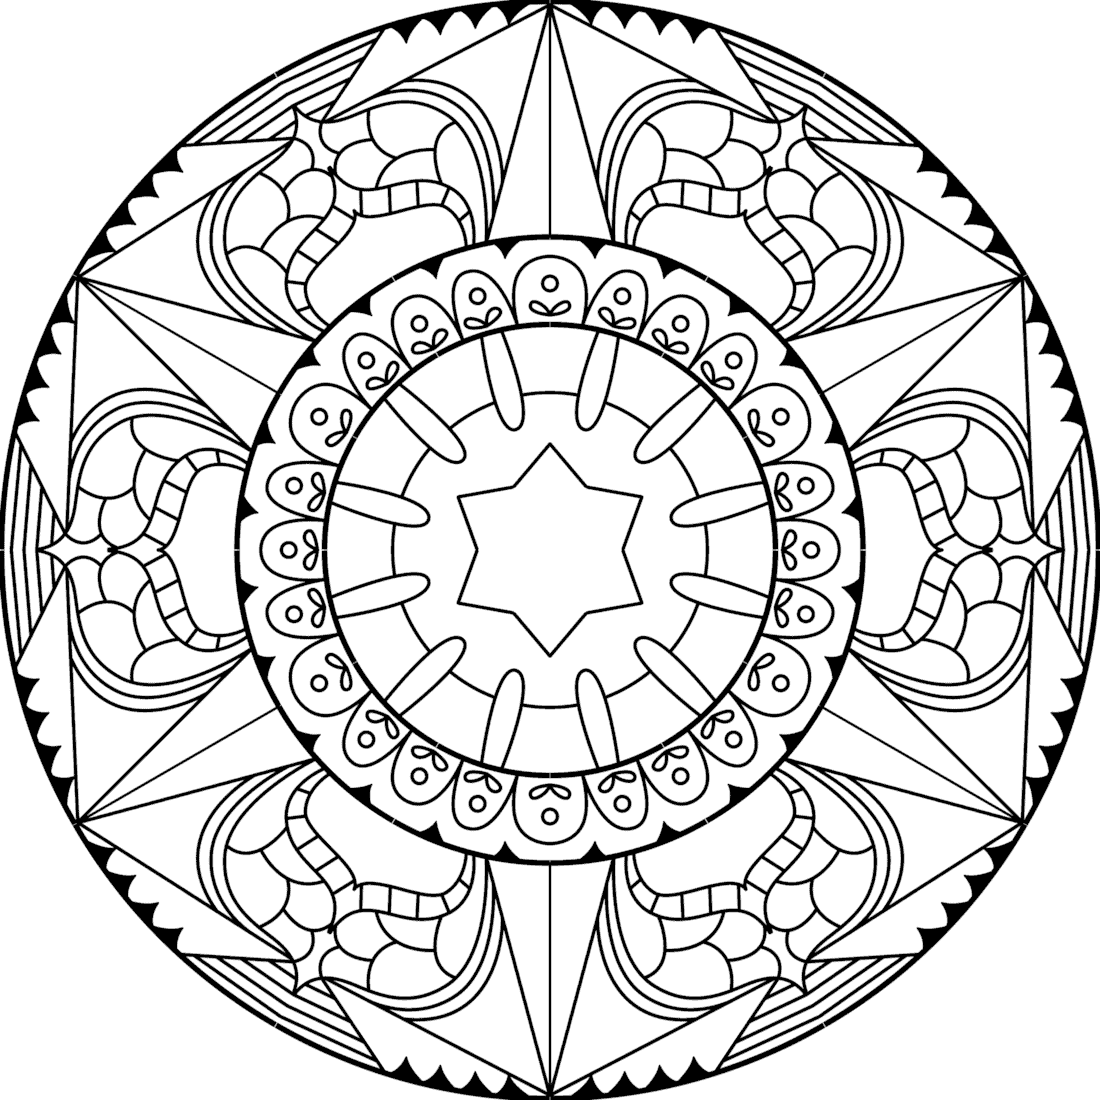 Badge of honor coloring page